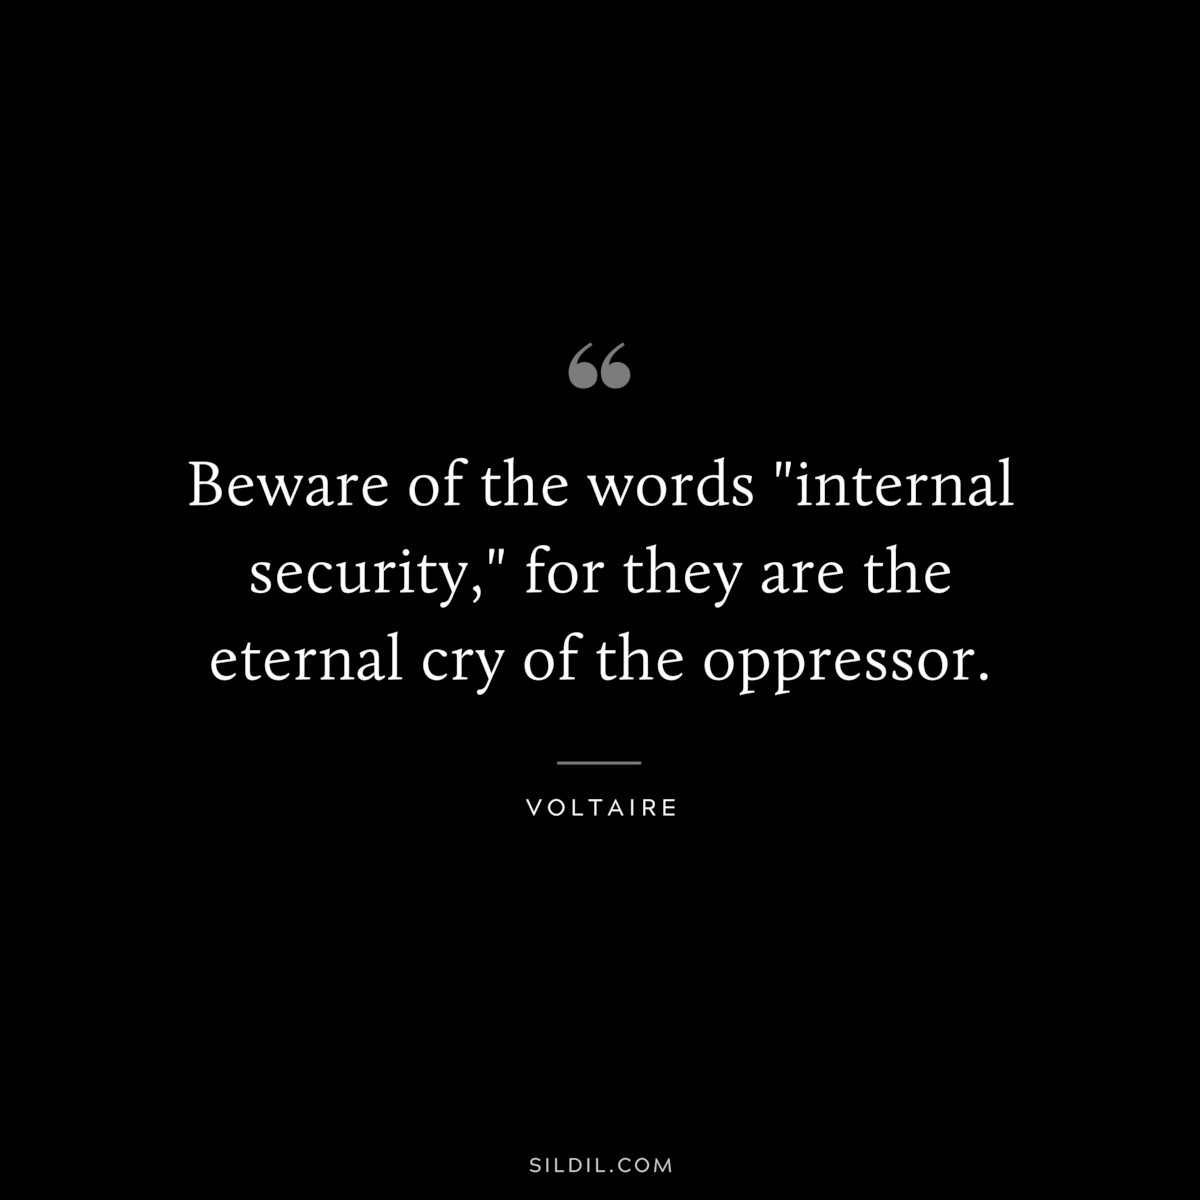 Beware of the words "internal security," for they are the eternal cry of the oppressor. ― Voltaire